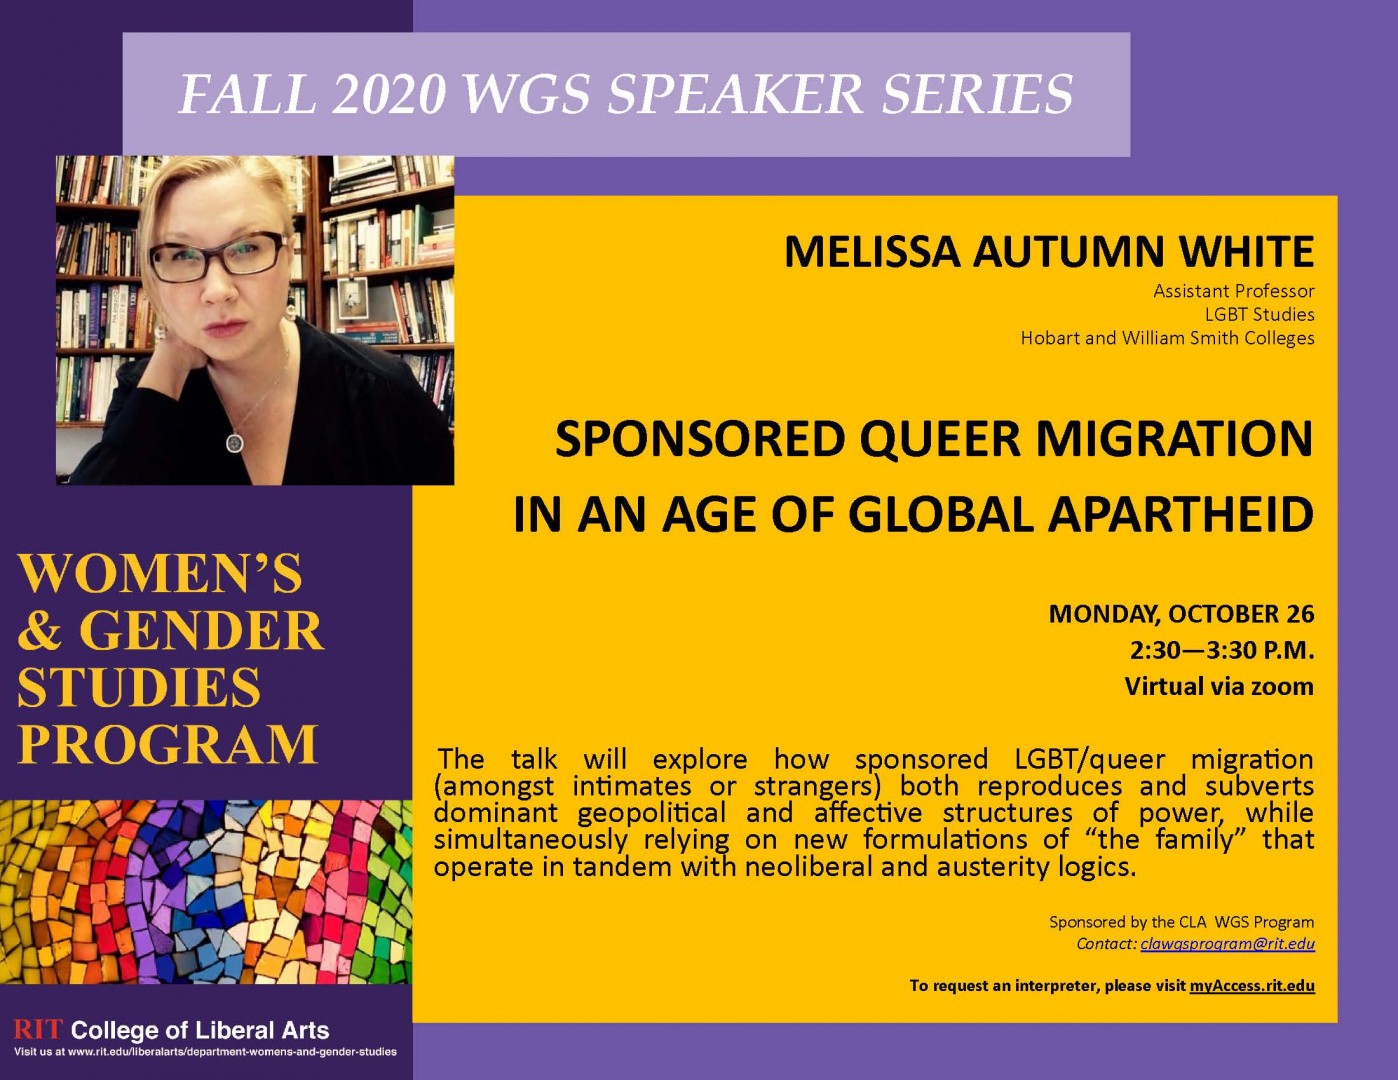 MELISSA AUTUMN WHITE, LGBT Studies, Hobart and William Smith Colleges, SPONSORED QUEER MIGRATION IN AN AGE OF GLOBAL APARTHEID, MONDAY, OCTOBER 26 2:30—3:30 P.M.